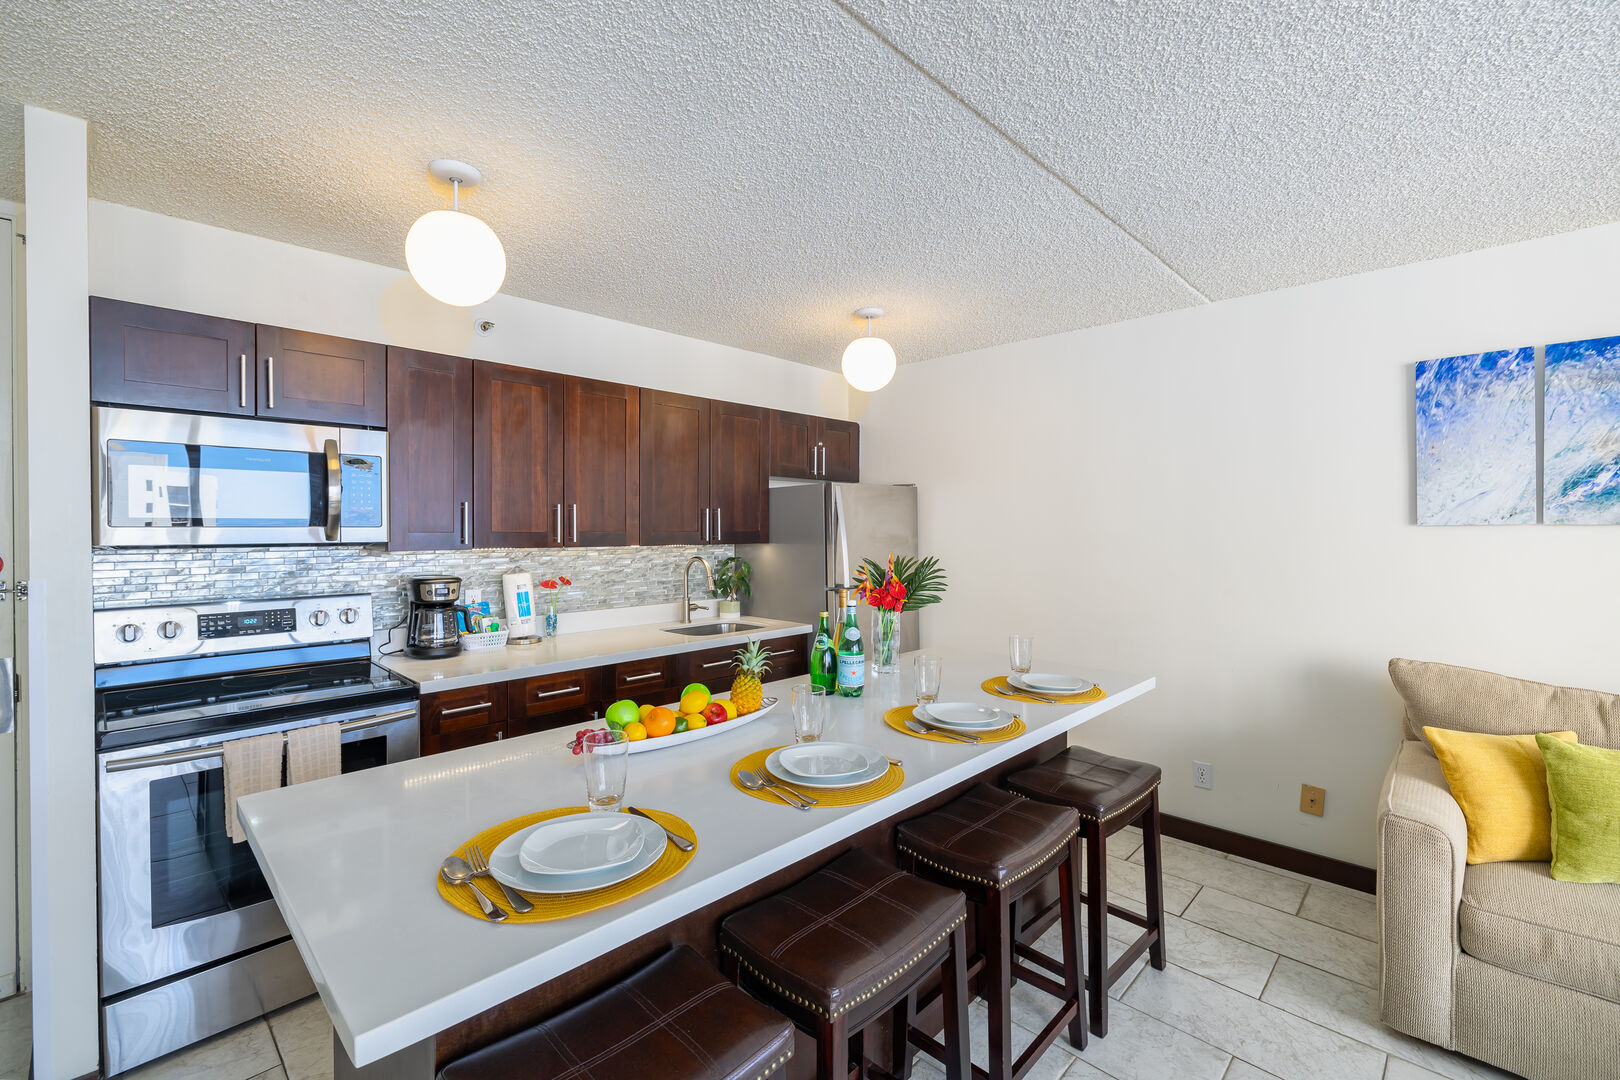 Fully equipped kitchen and dining area.